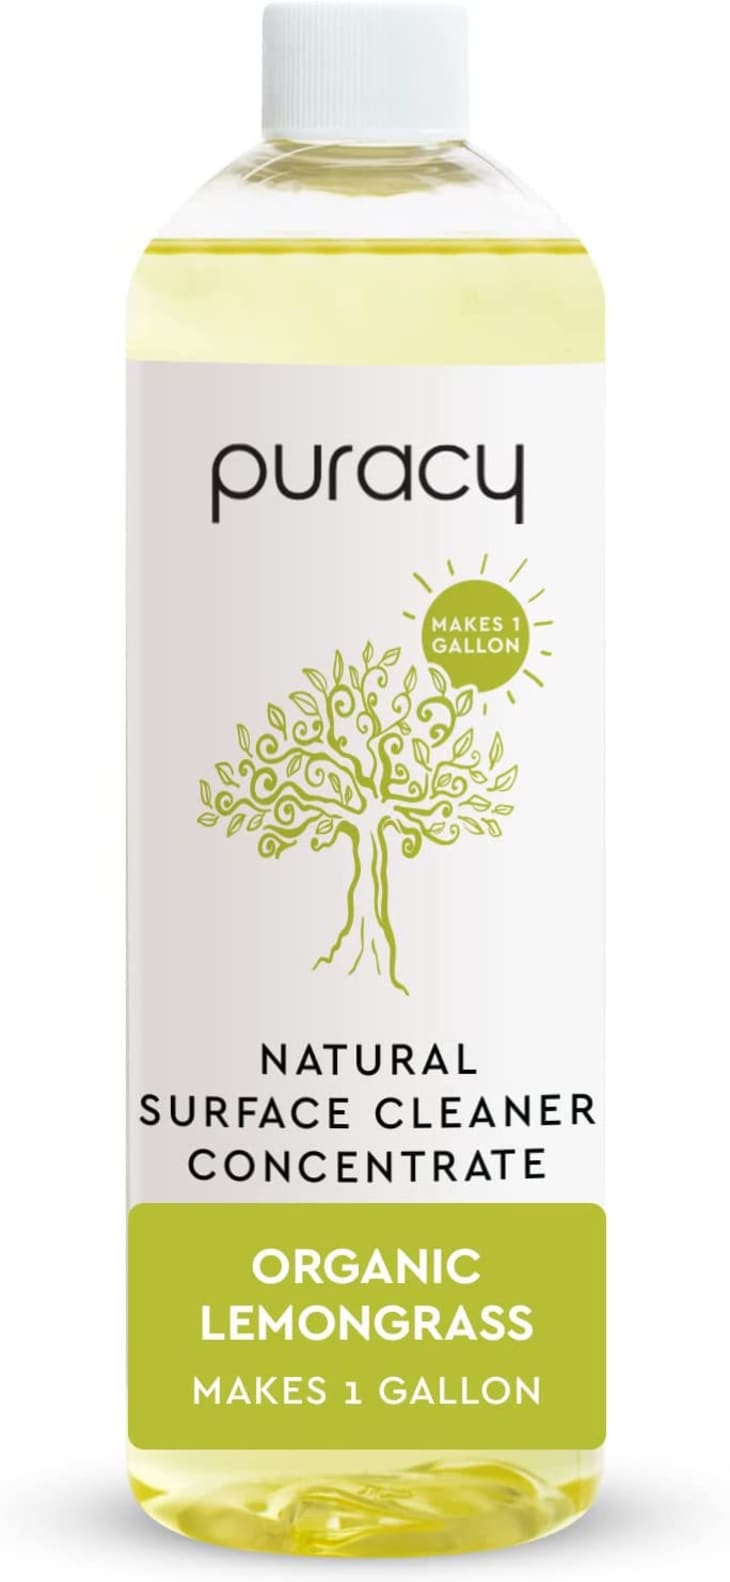 Product Image: Puracy All Purpose Cleaner Concentrate